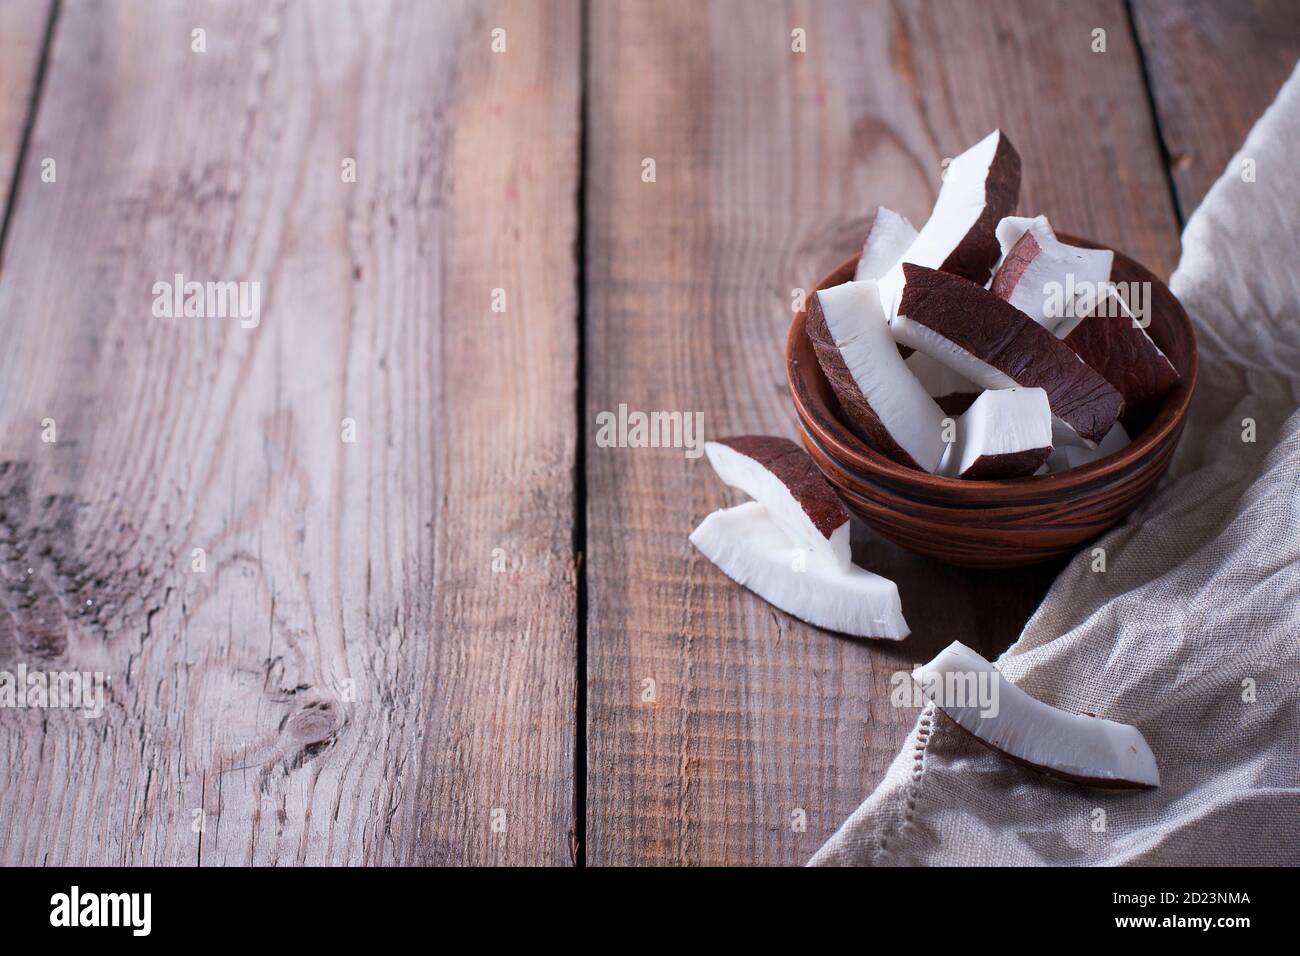 Ceramic bowl with coconut slices on a wooden background. Stock Photo